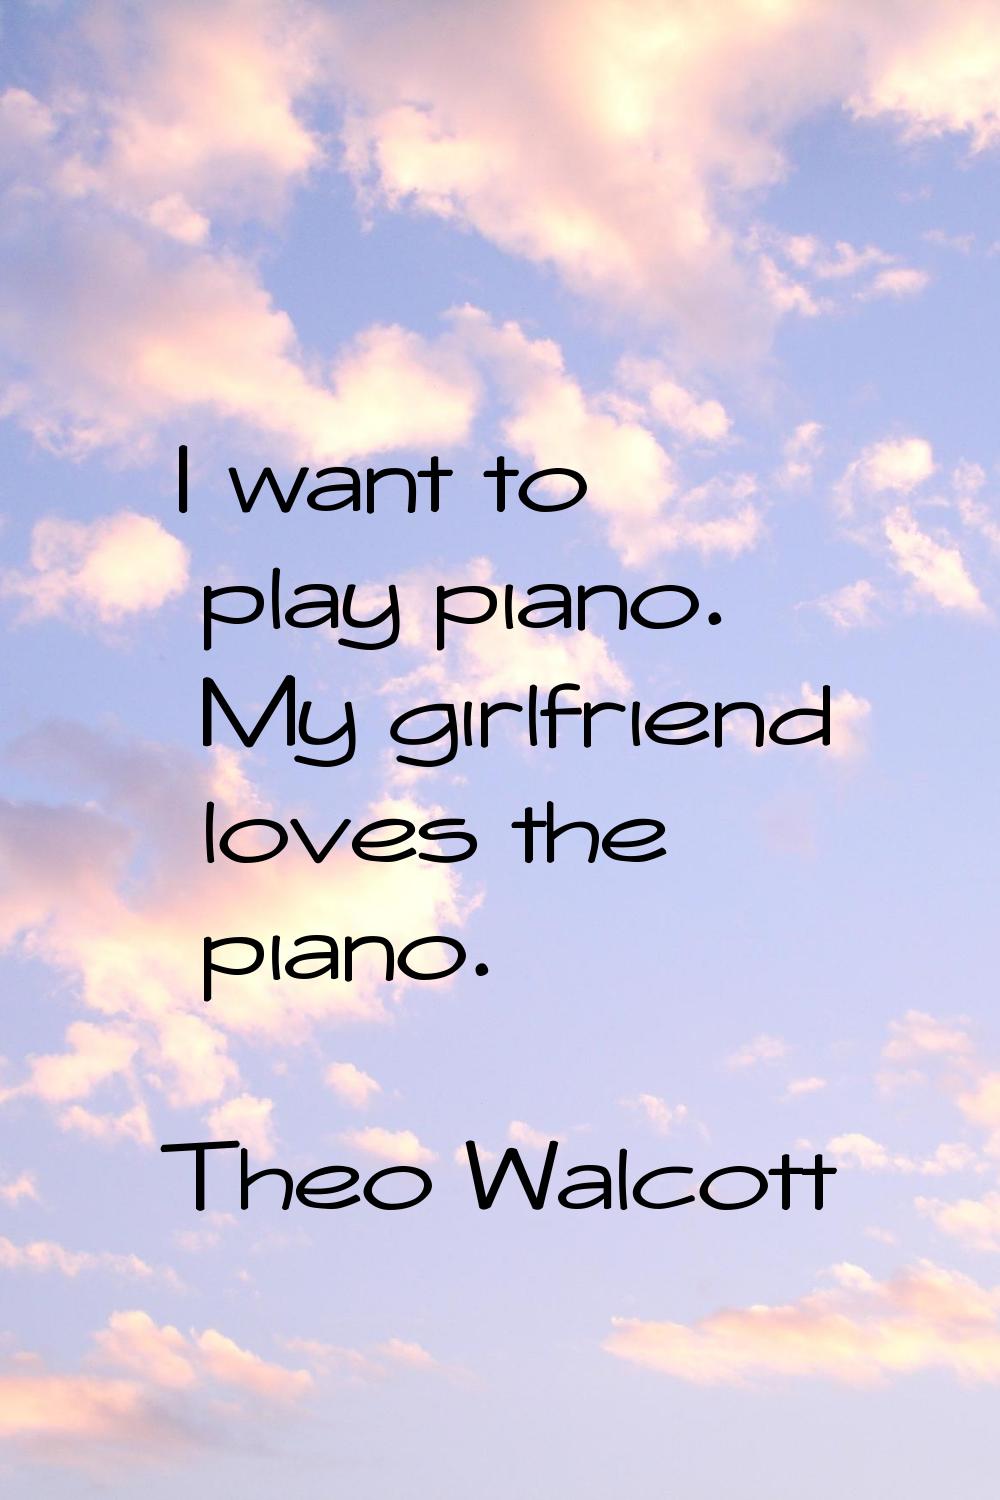 I want to play piano. My girlfriend loves the piano.